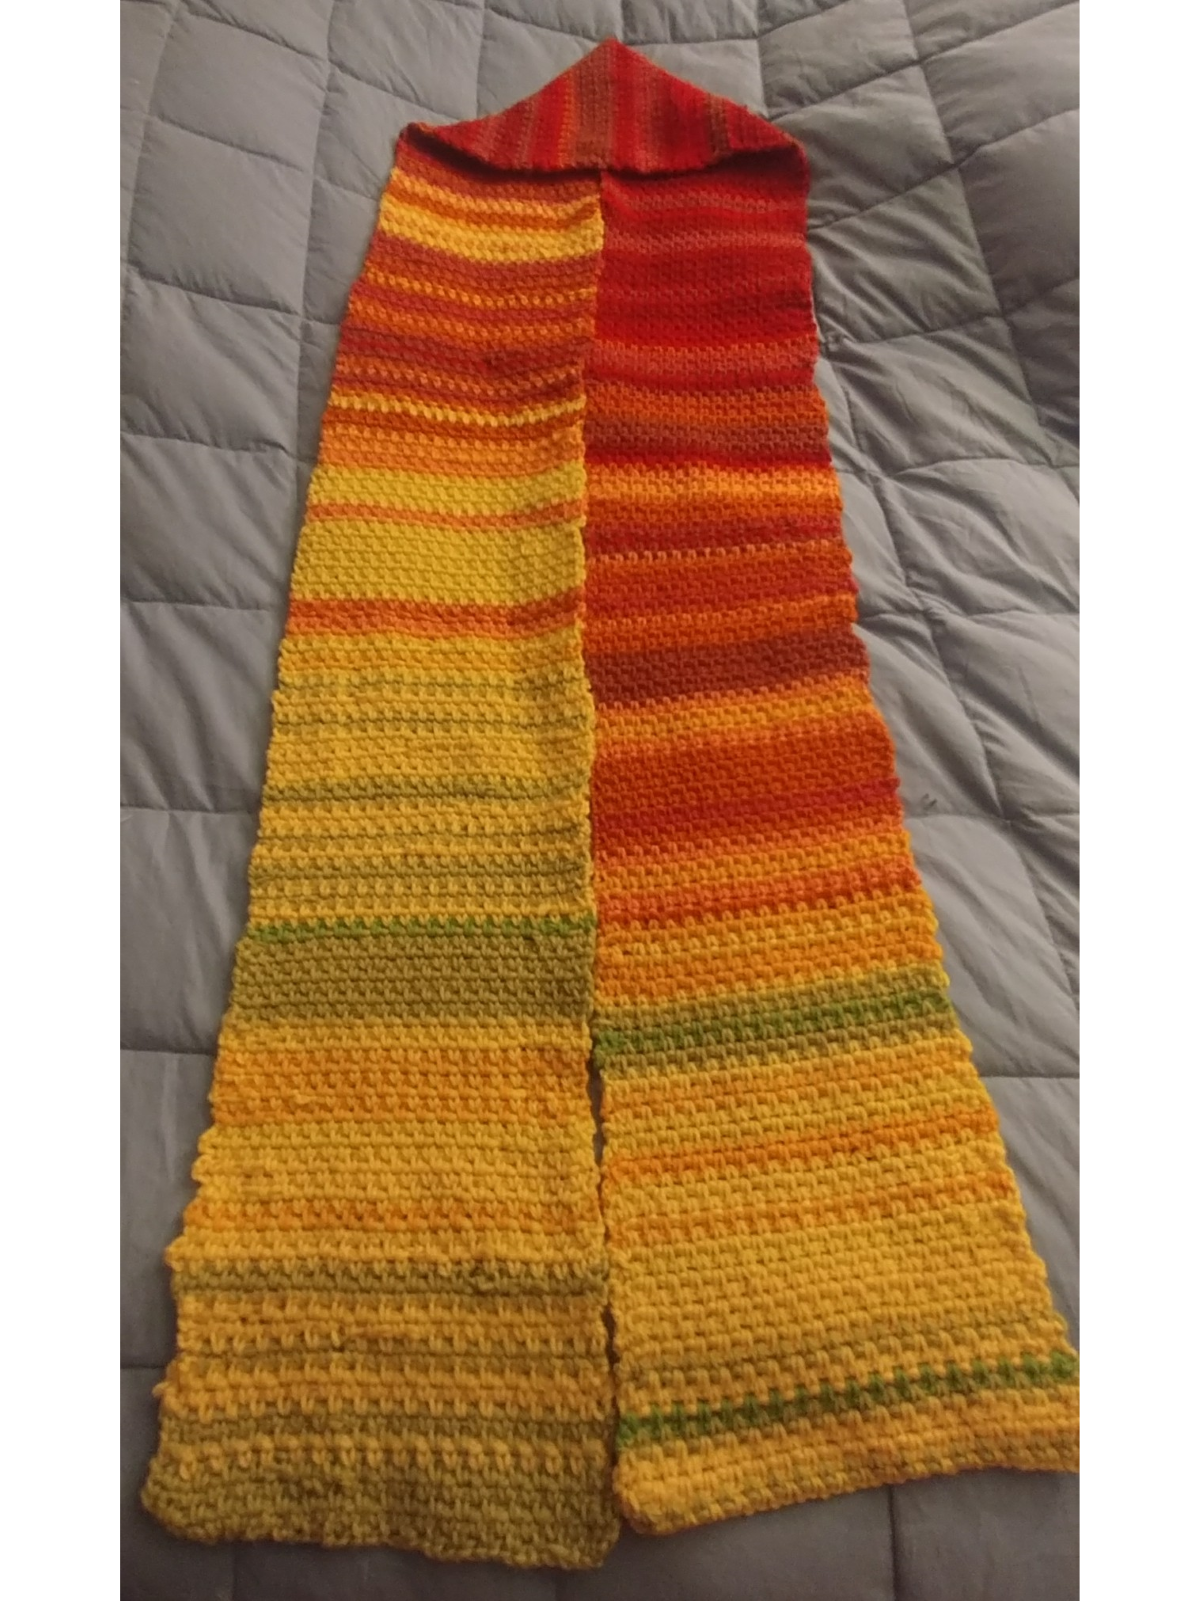 Scarf representing the daily temperatures of Davis in 2019